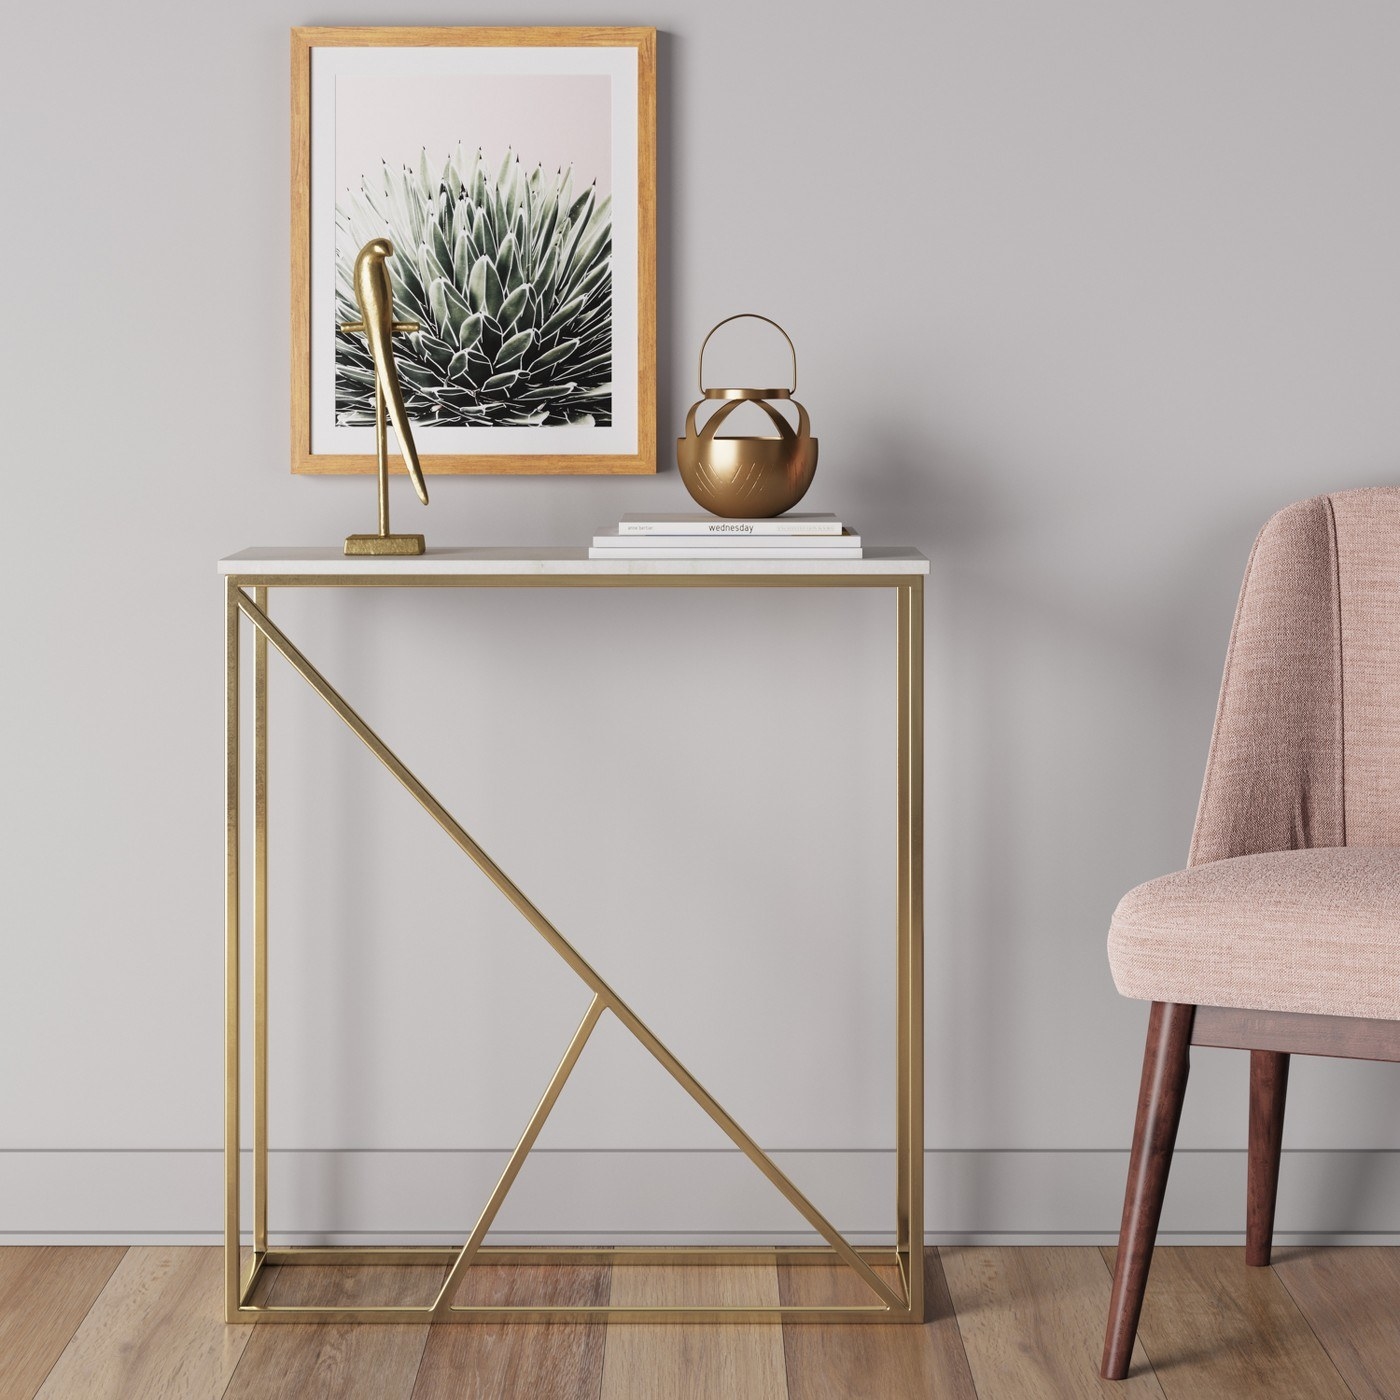 21 Showstopping Pieces Of Furniture You Can Get For Under $100